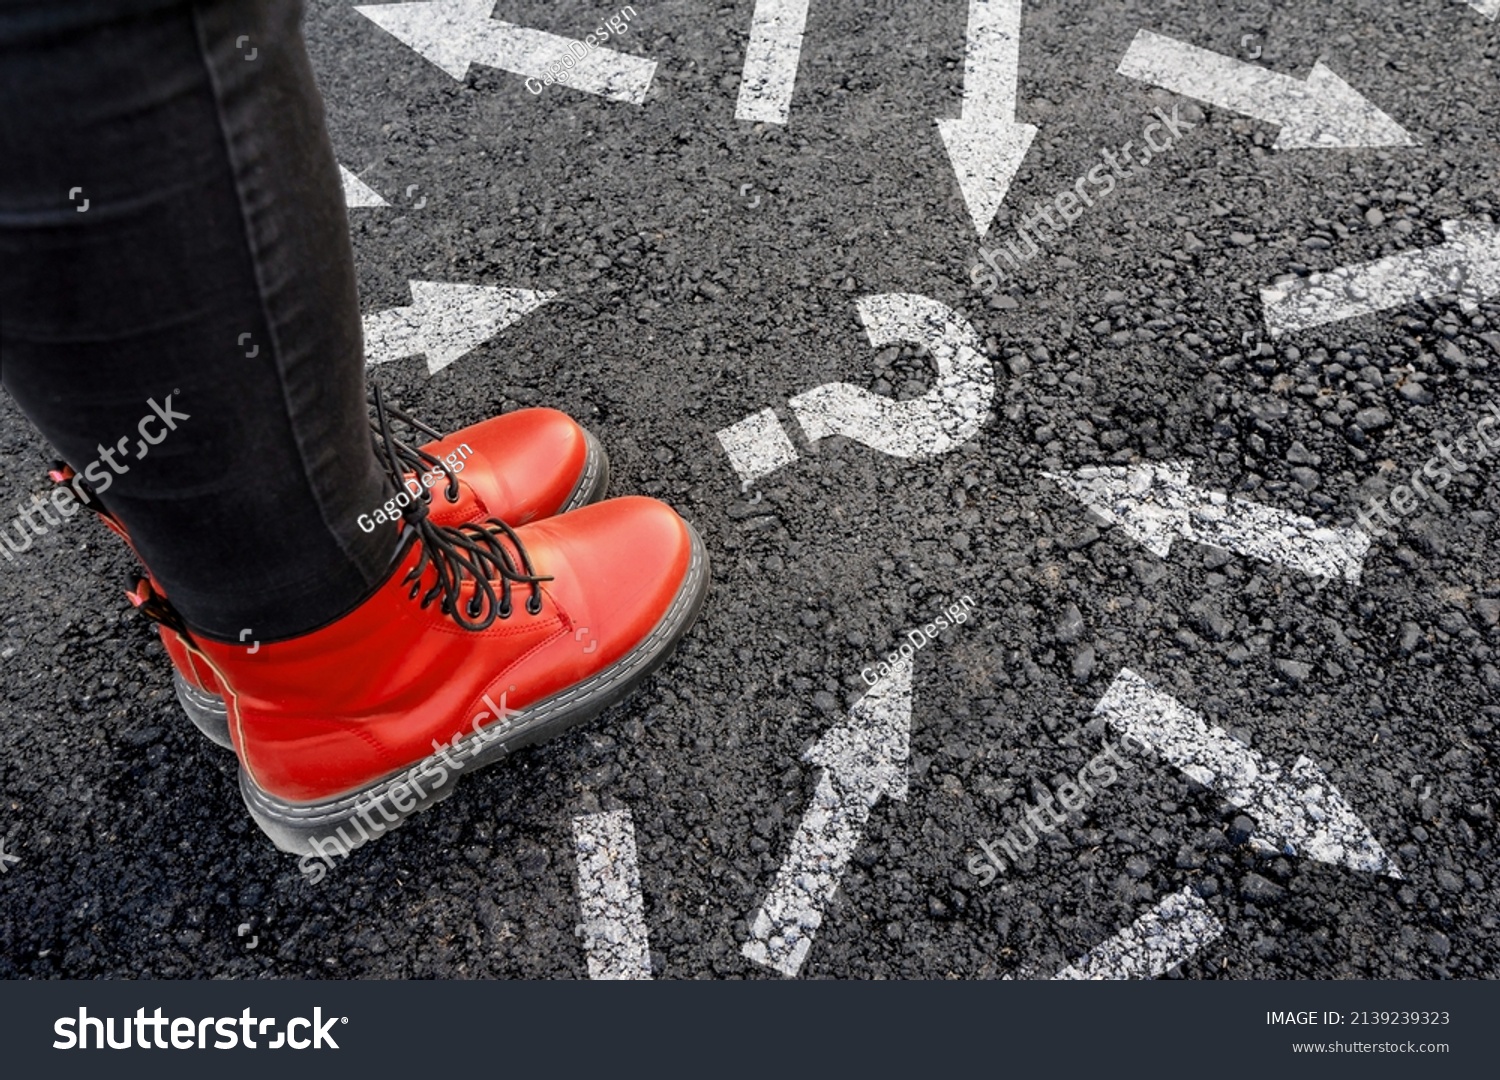 woman in boots standing on asphalt next to multitude of arrows in different directions and question mark, confusion choice chaos concept #2139239323